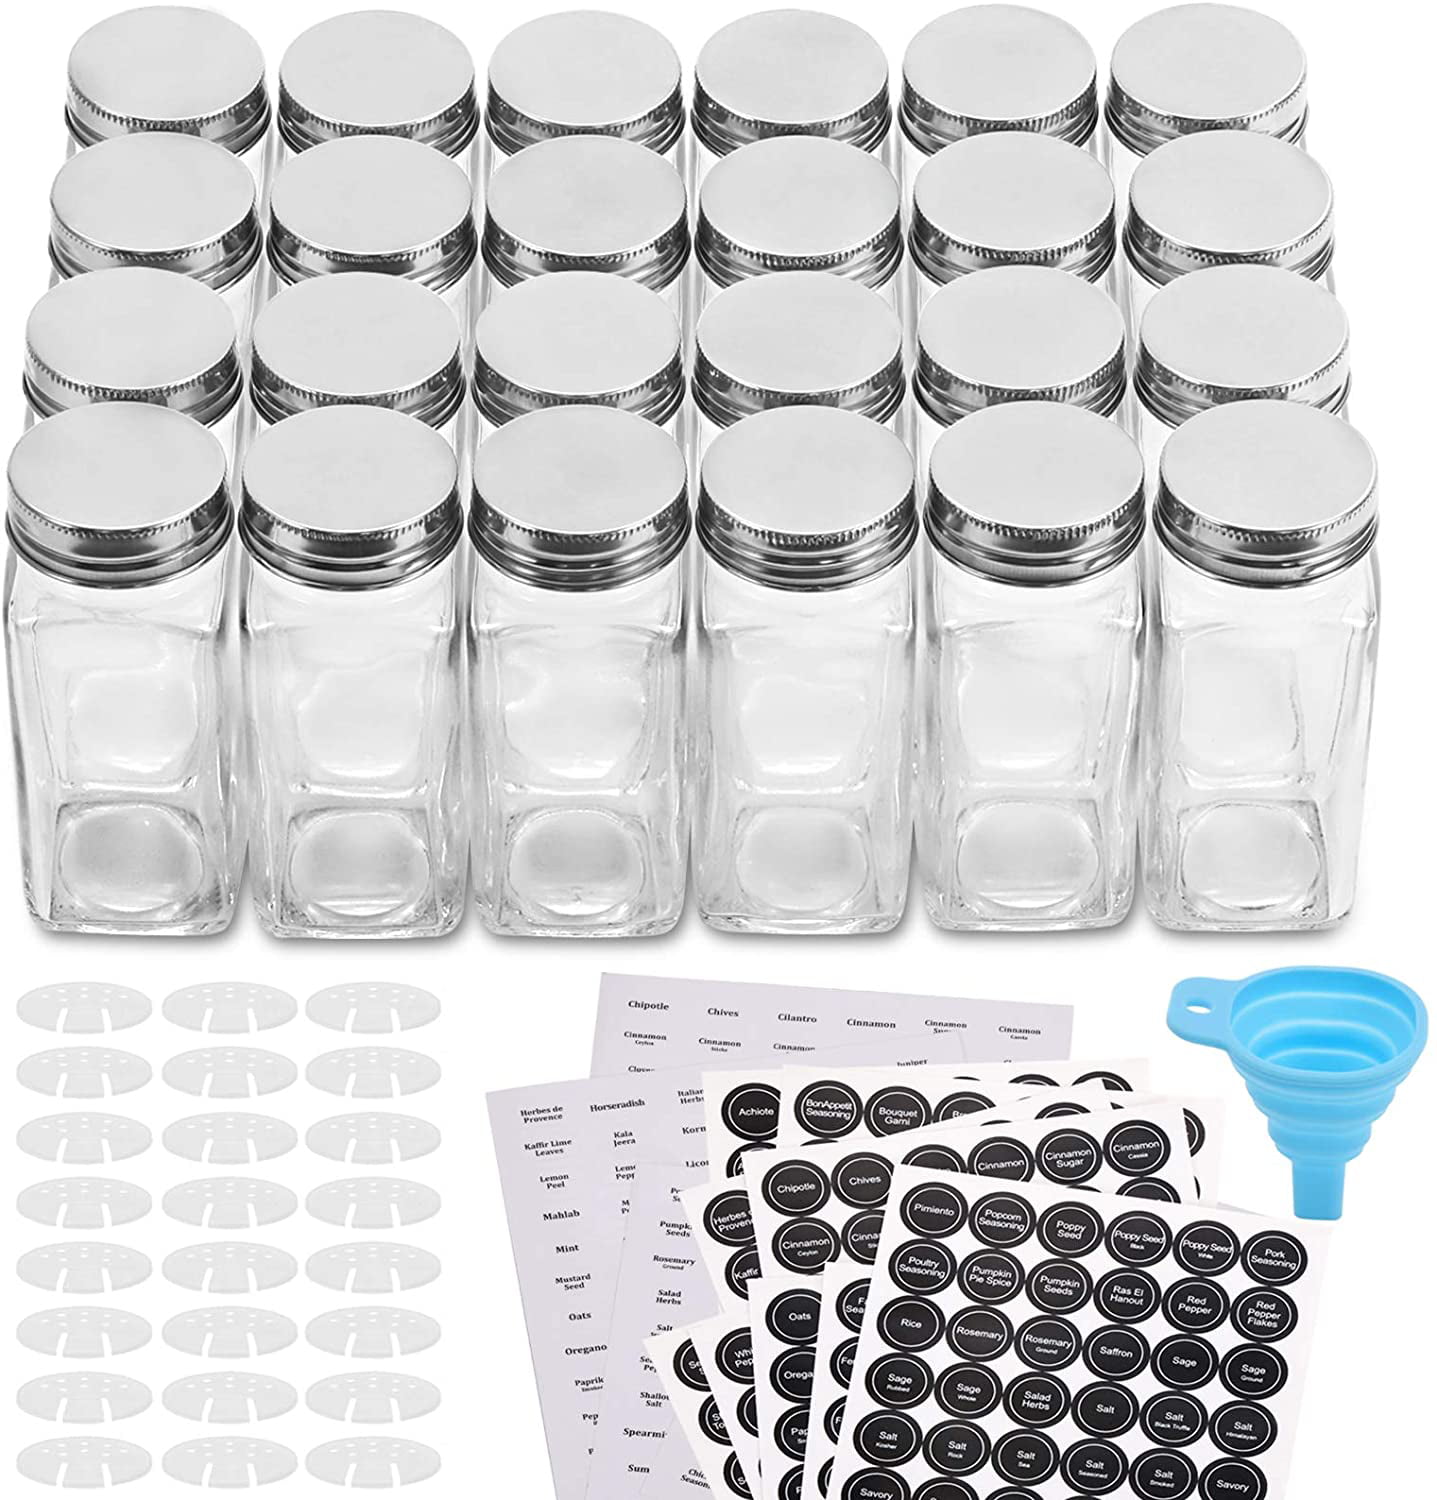 6oz Empty Square Spice Bottles with Shaker Lids and Airtight Metal Caps Chalk Marker and Silicone Collapsible Funnel Included 30 Pcs Glass Spice Jars with Spice Labels 